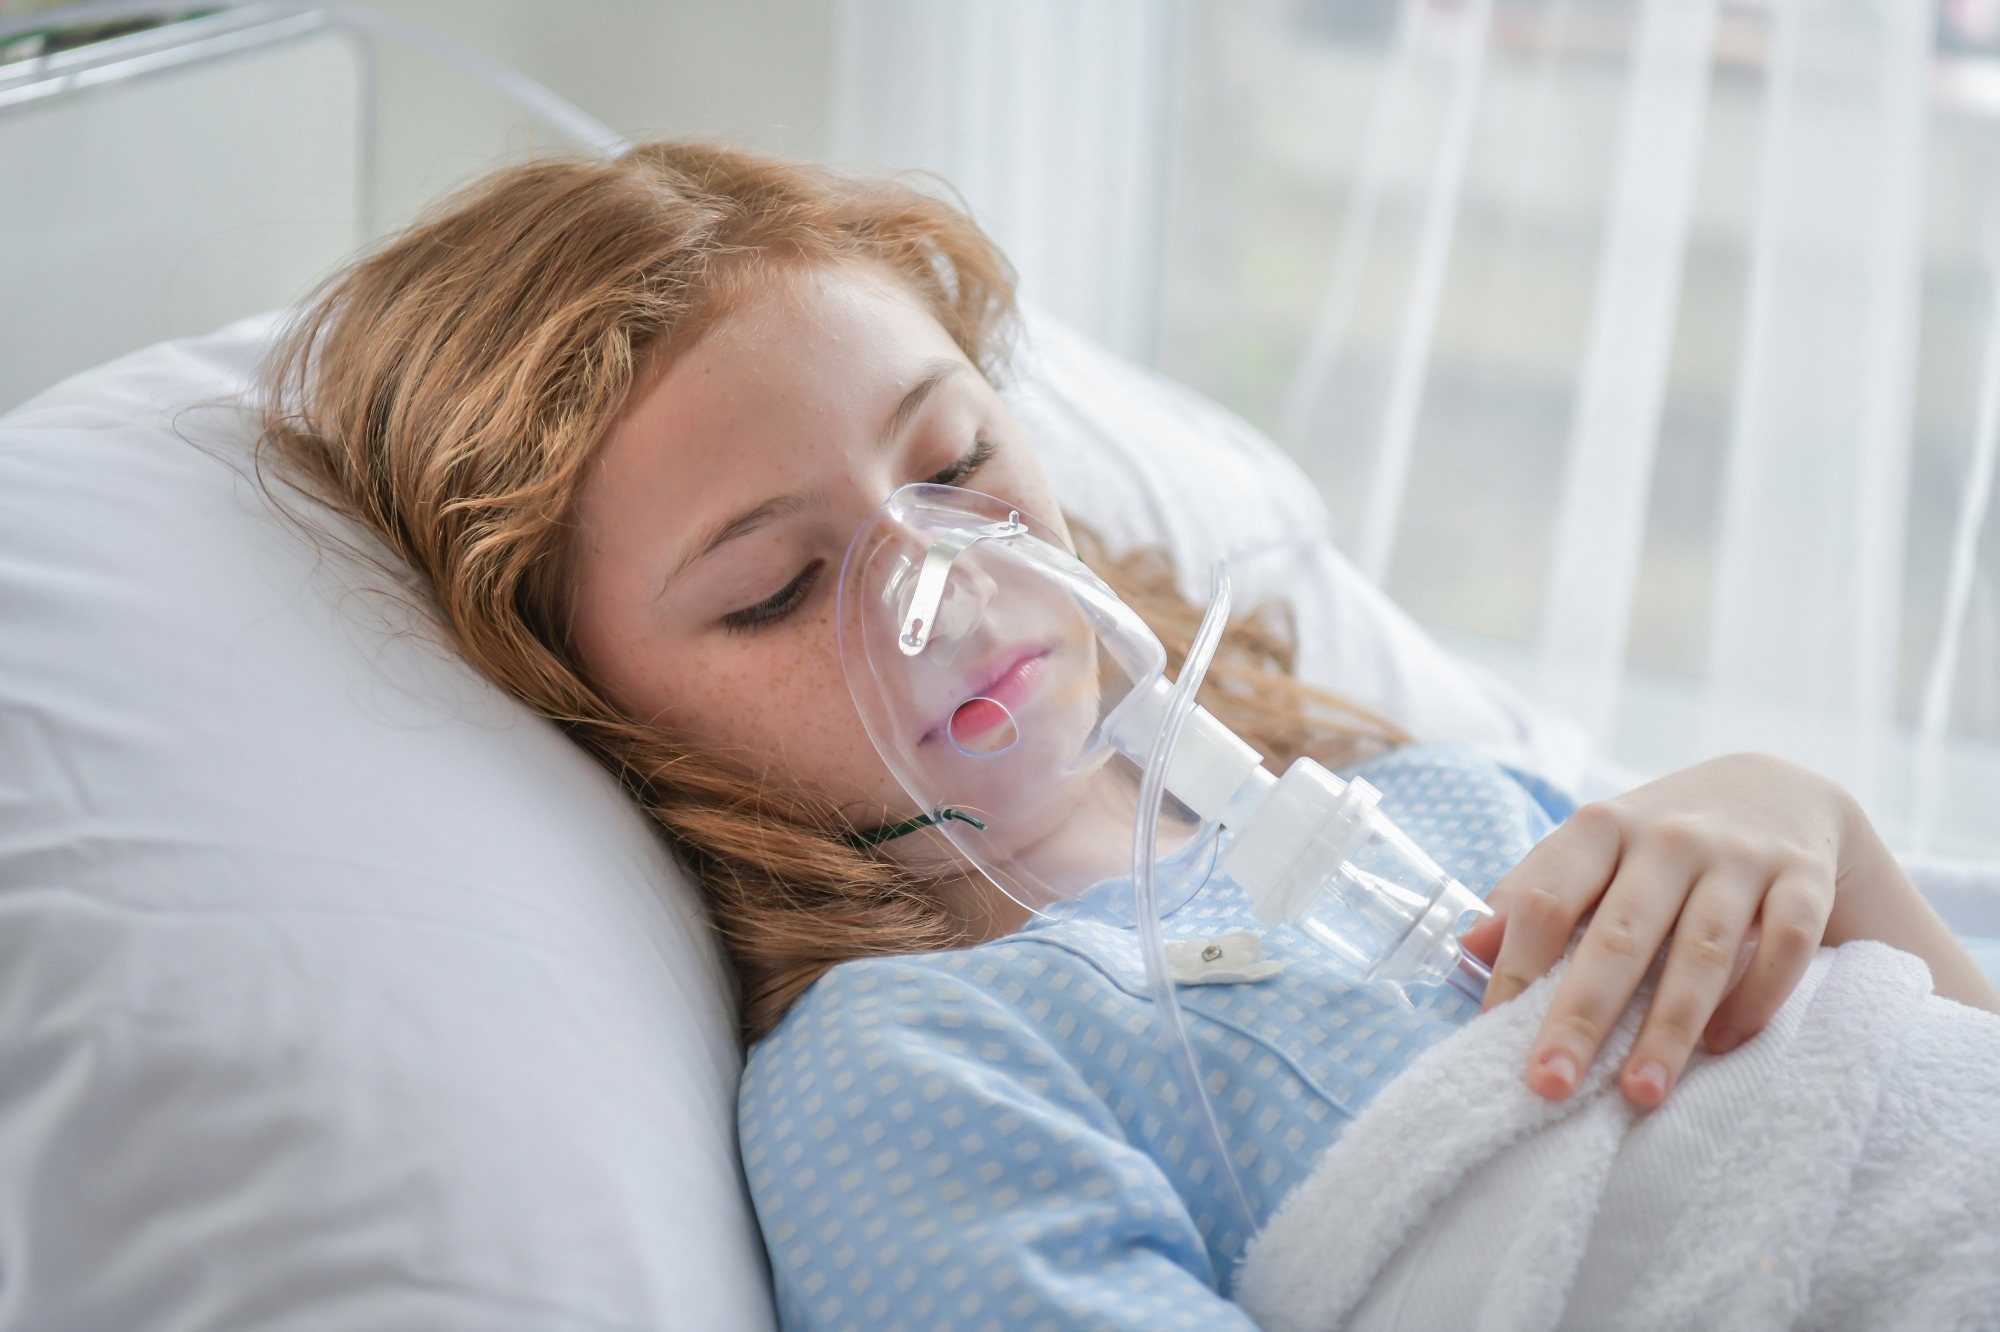 Study: Epidemiology of 7375 children and adolescents hospitalized with COVID-19 in Germany, reported via a prospective, nationwide surveillance study in 2020–2022. Image Credit: Sellwell / Shutterstock.com